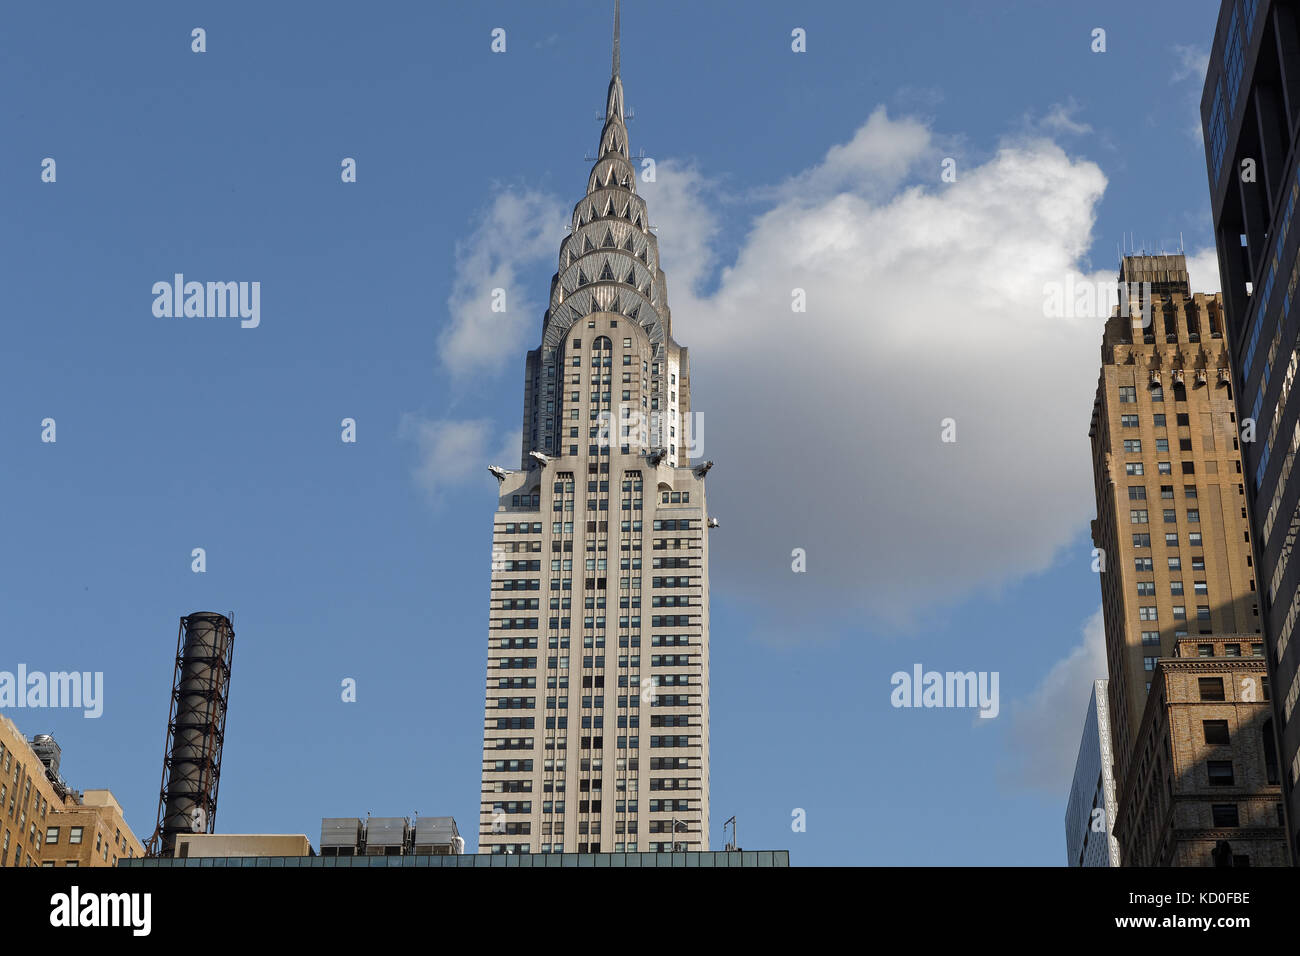 NEW YORK CITY, USA, September 10, 2017 : The Chrysler Building is an Art Deco-style skyscraper on the East Side of Midtown Manhatt. The structure was  Stock Photo